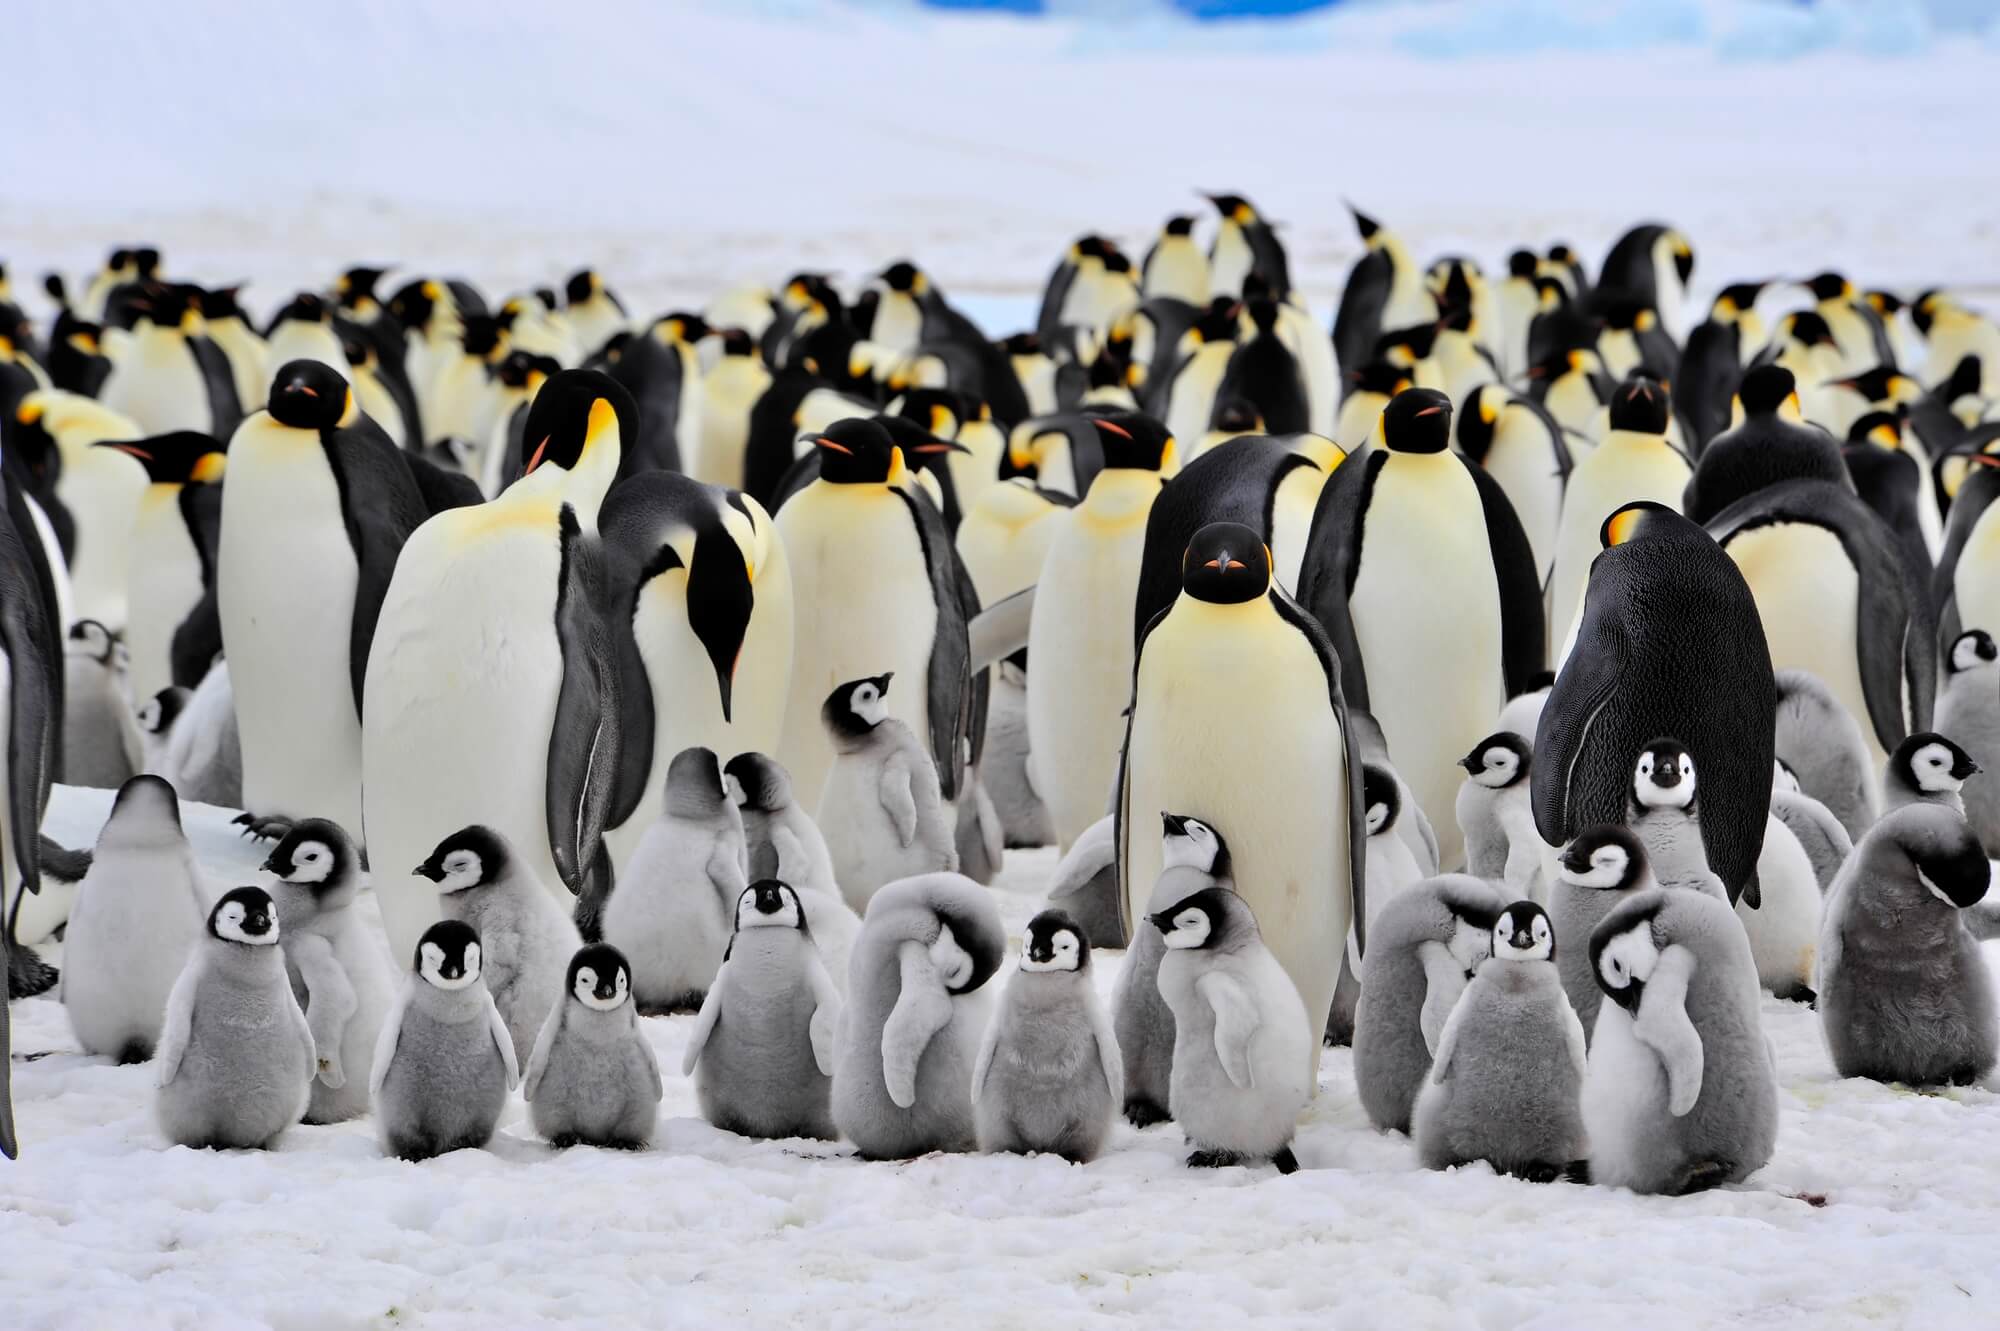 World Penguin Day – Days Of The Year (25th April)